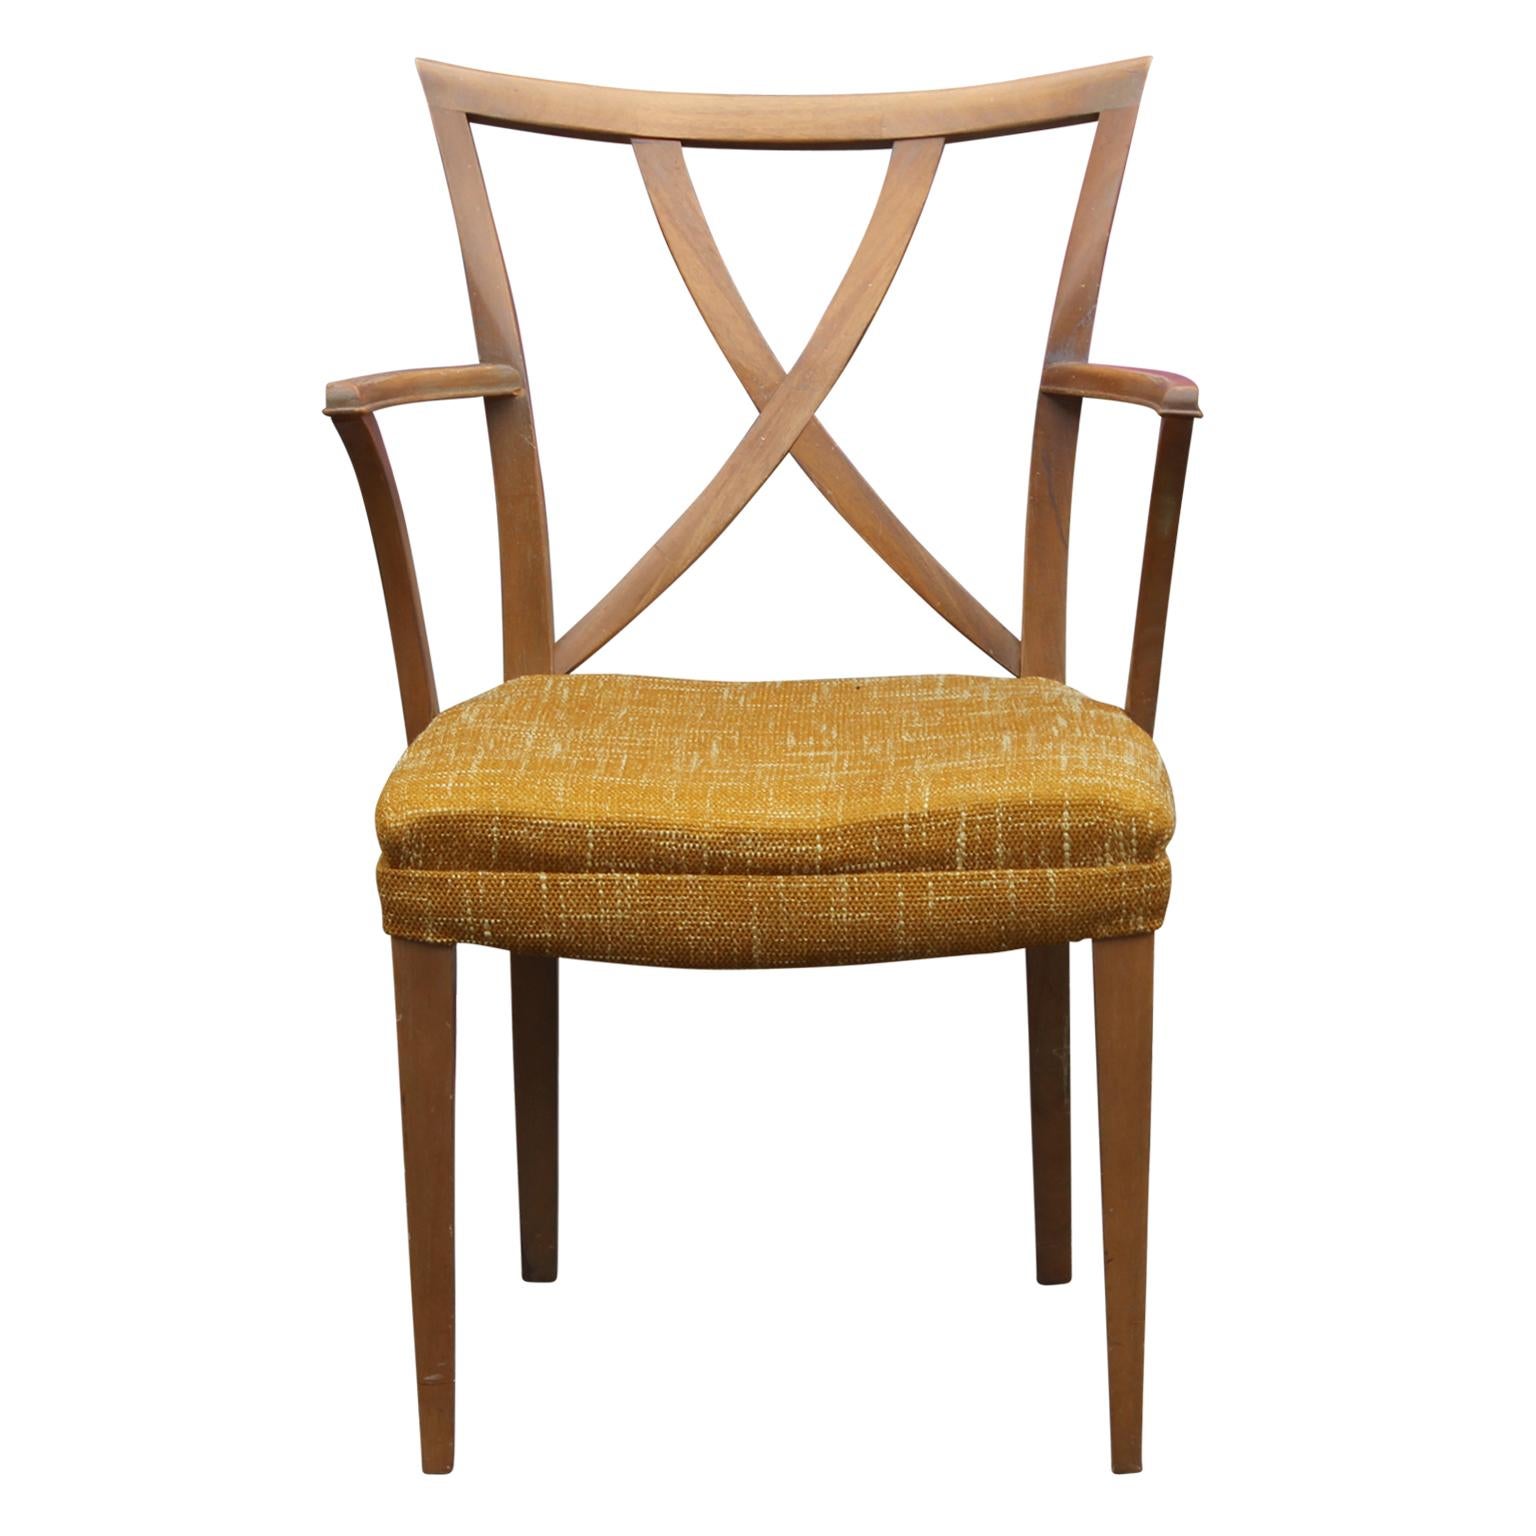 Stunning X-back dining chairs in a set of six by Paul Frankl. Two of them are captain's chairs, and four of them are side chairs. They are ready to be reupholstered and can be COM.